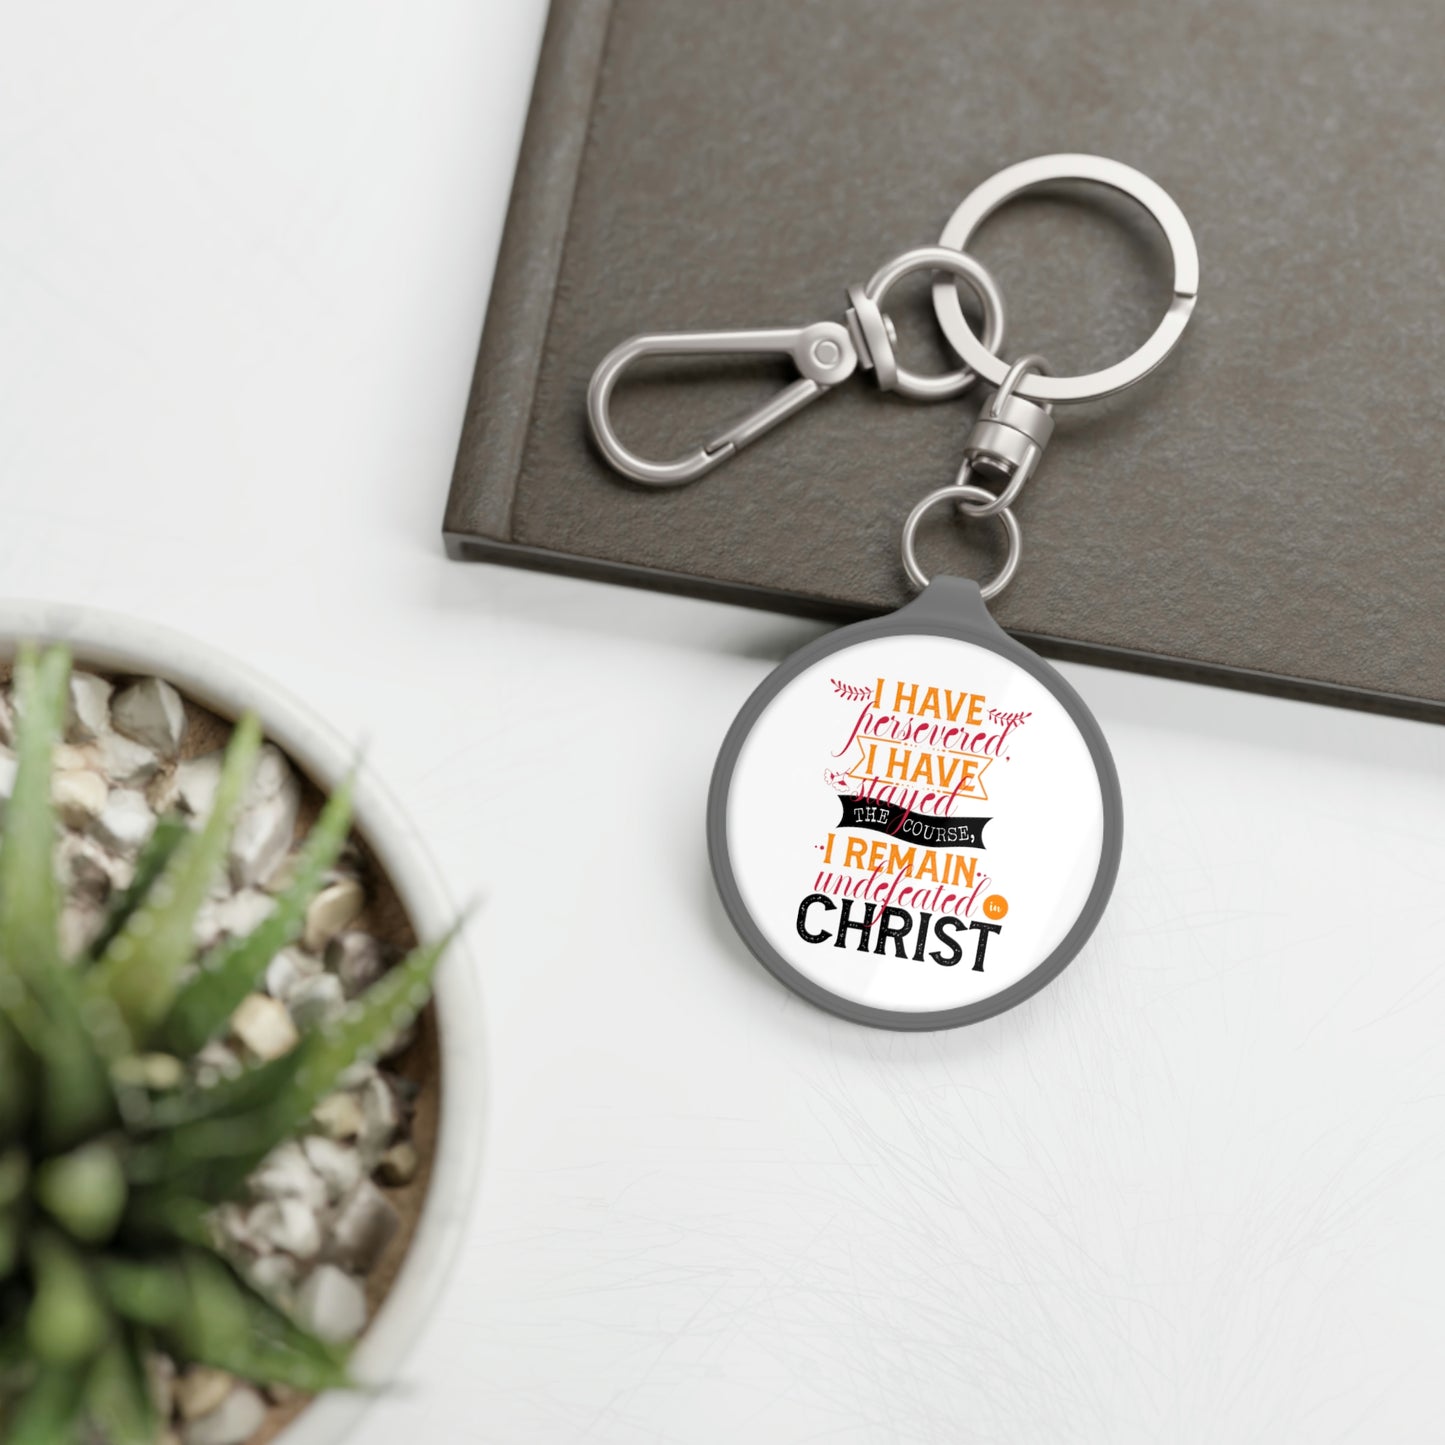 I Have Persevered I Have Stayed The Course I Remain Undefeated In Christ Key Fob